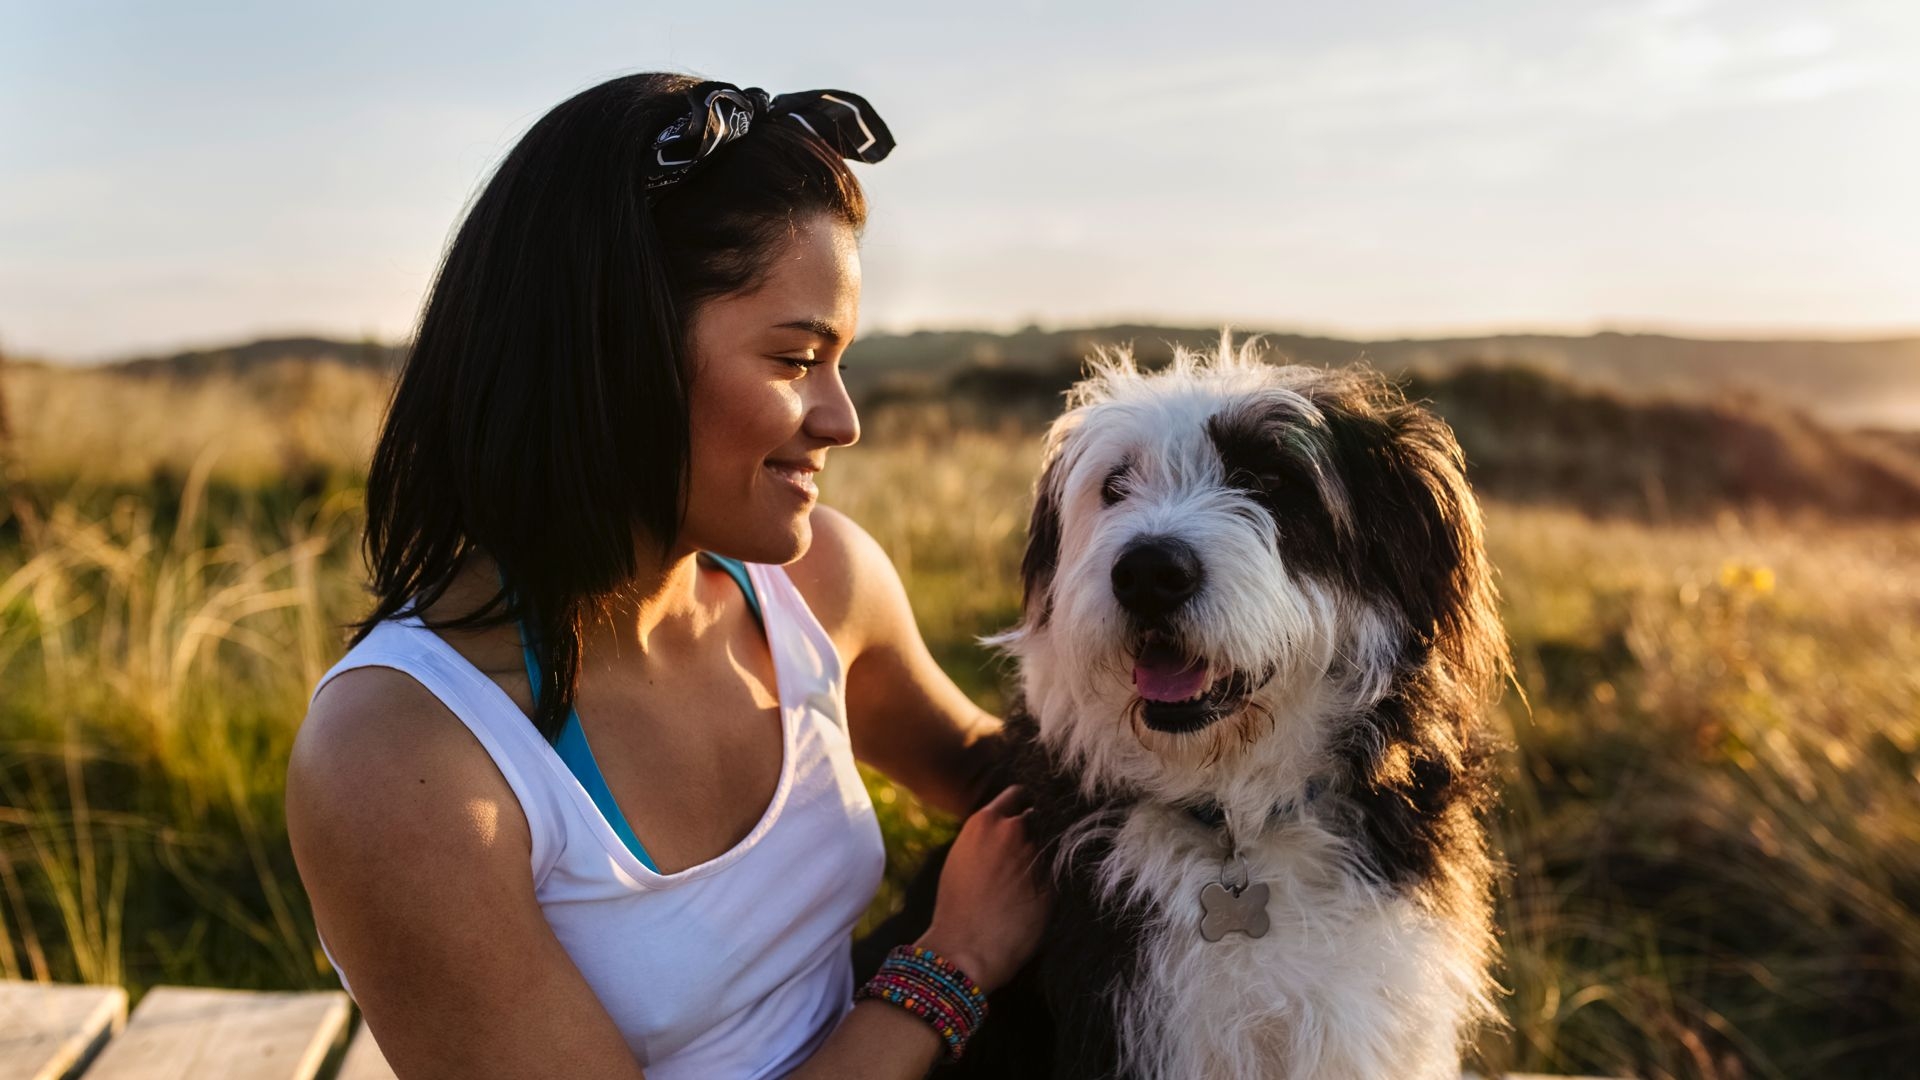 The Power of Pets, Health Benefits of Human-Animal Interactions